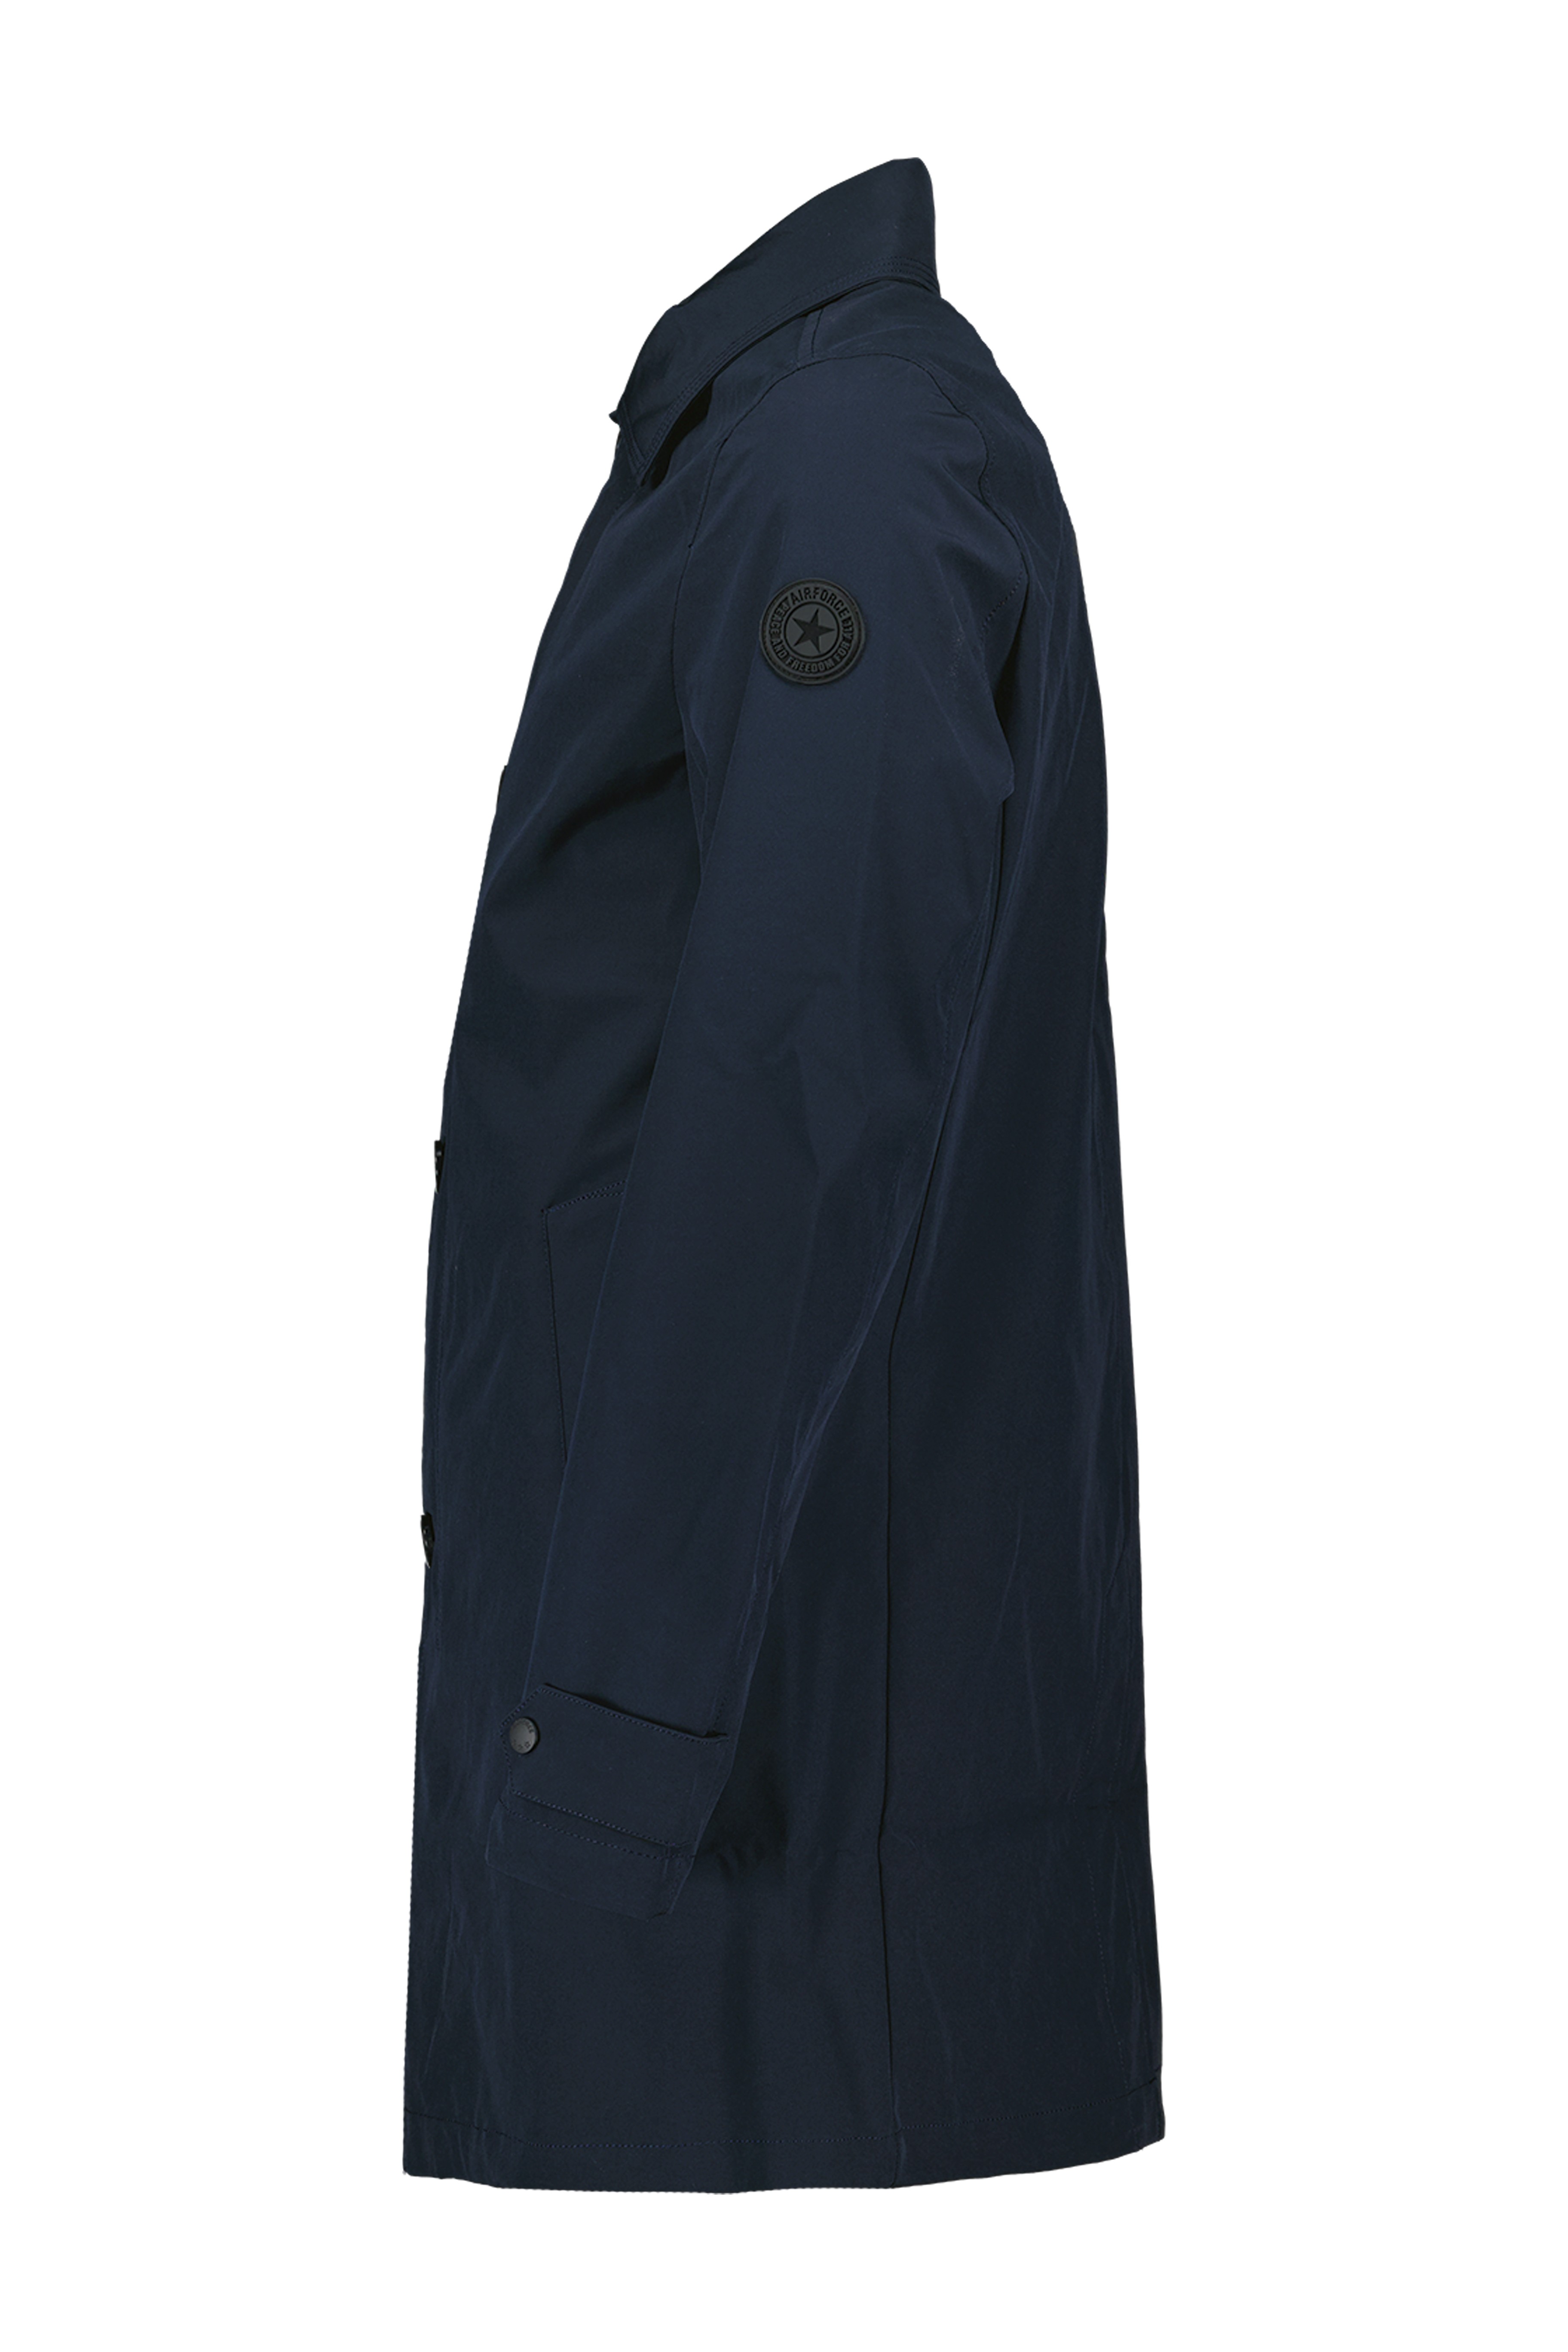 Airforce Mens Trenchcoat